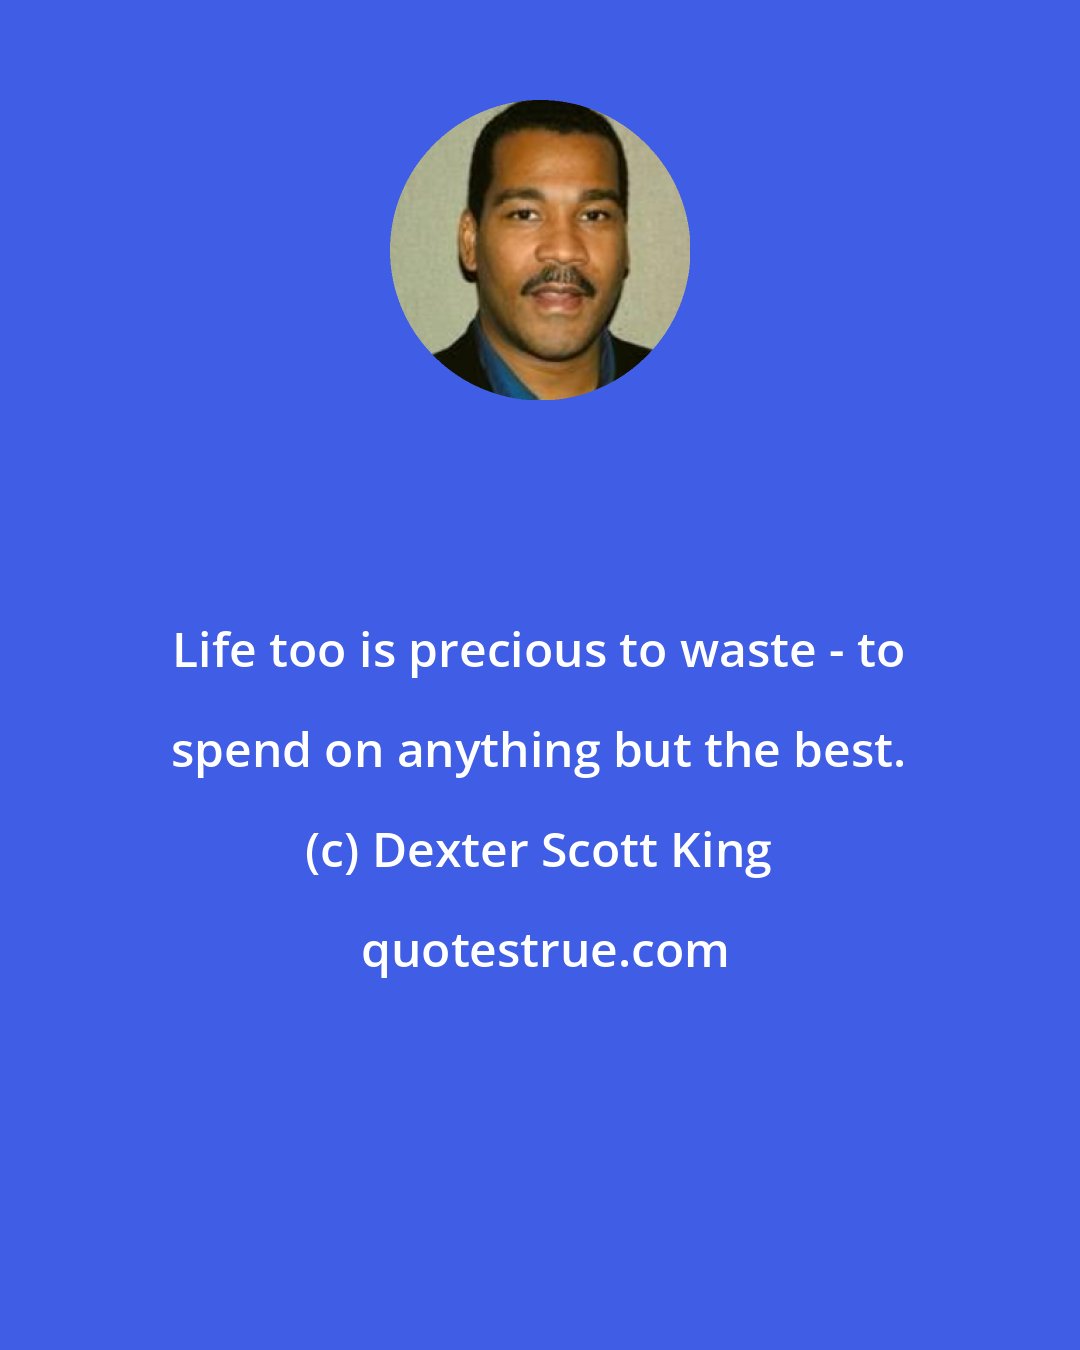 Dexter Scott King: Life too is precious to waste - to spend on anything but the best.